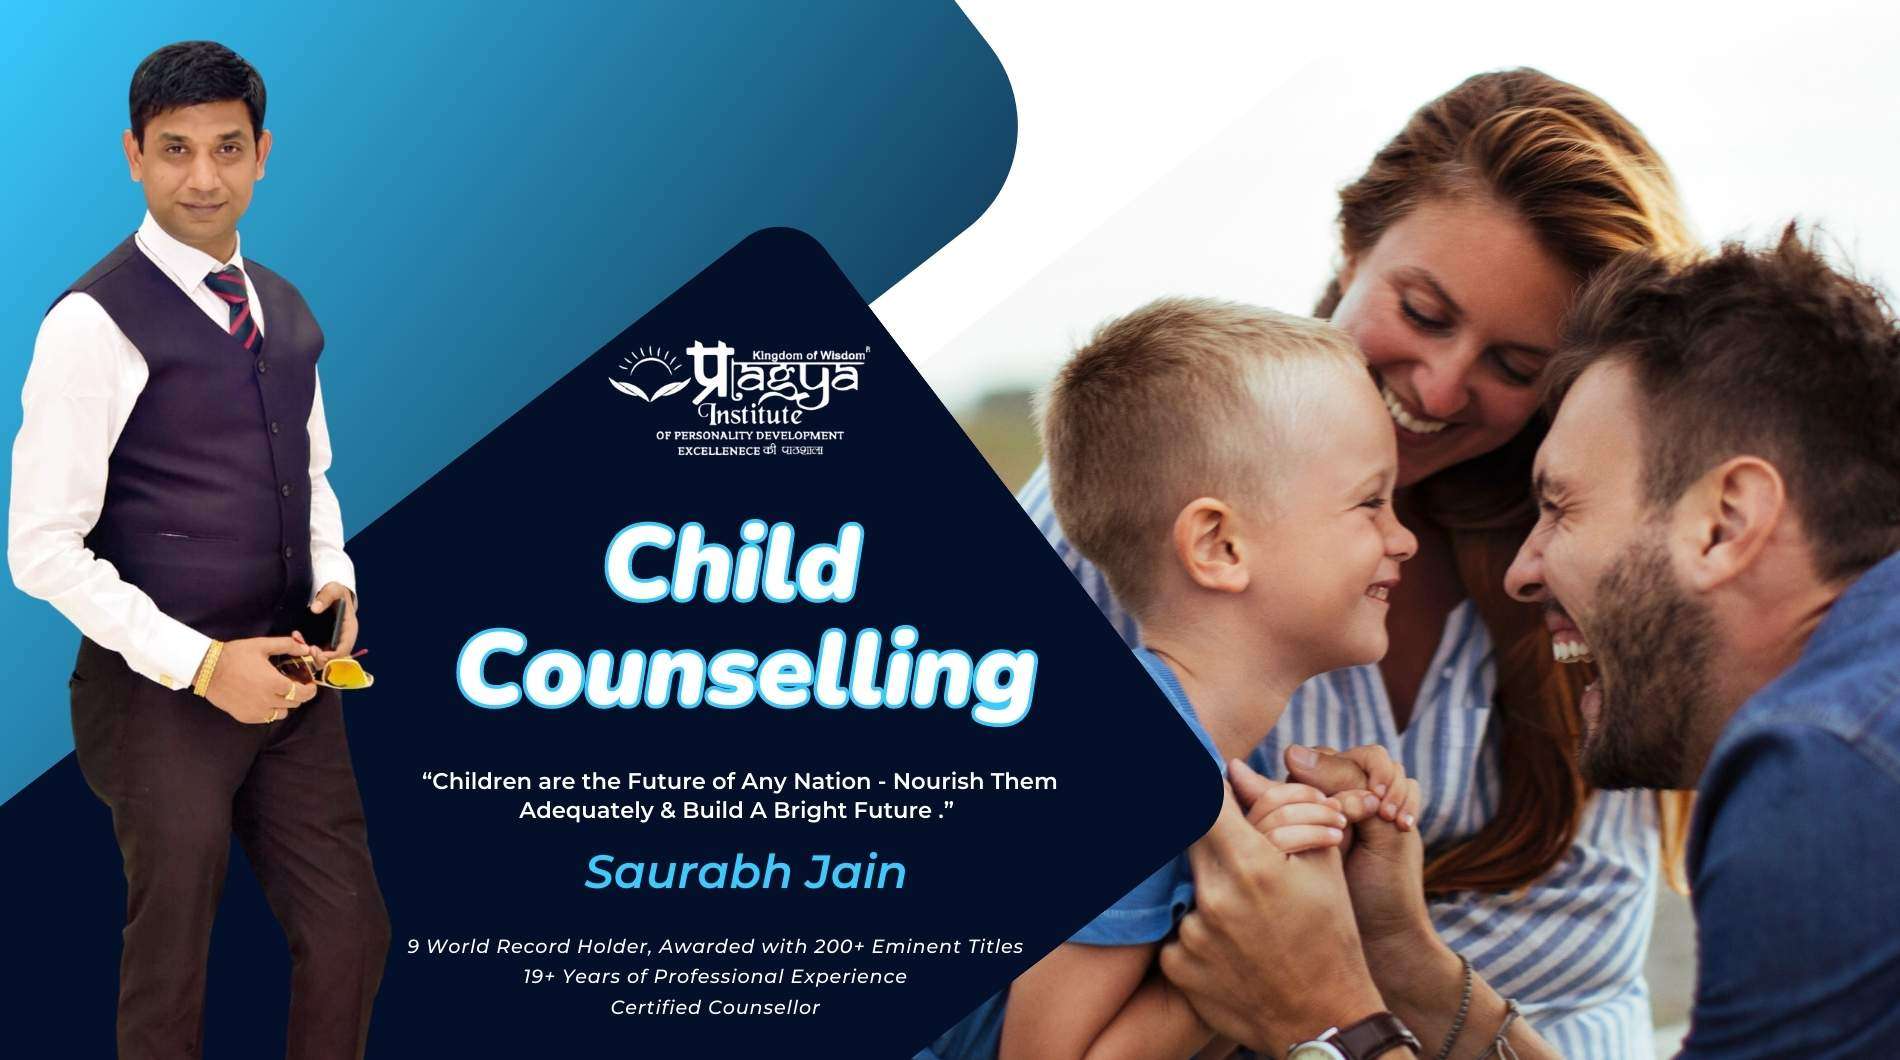 Child Counselling